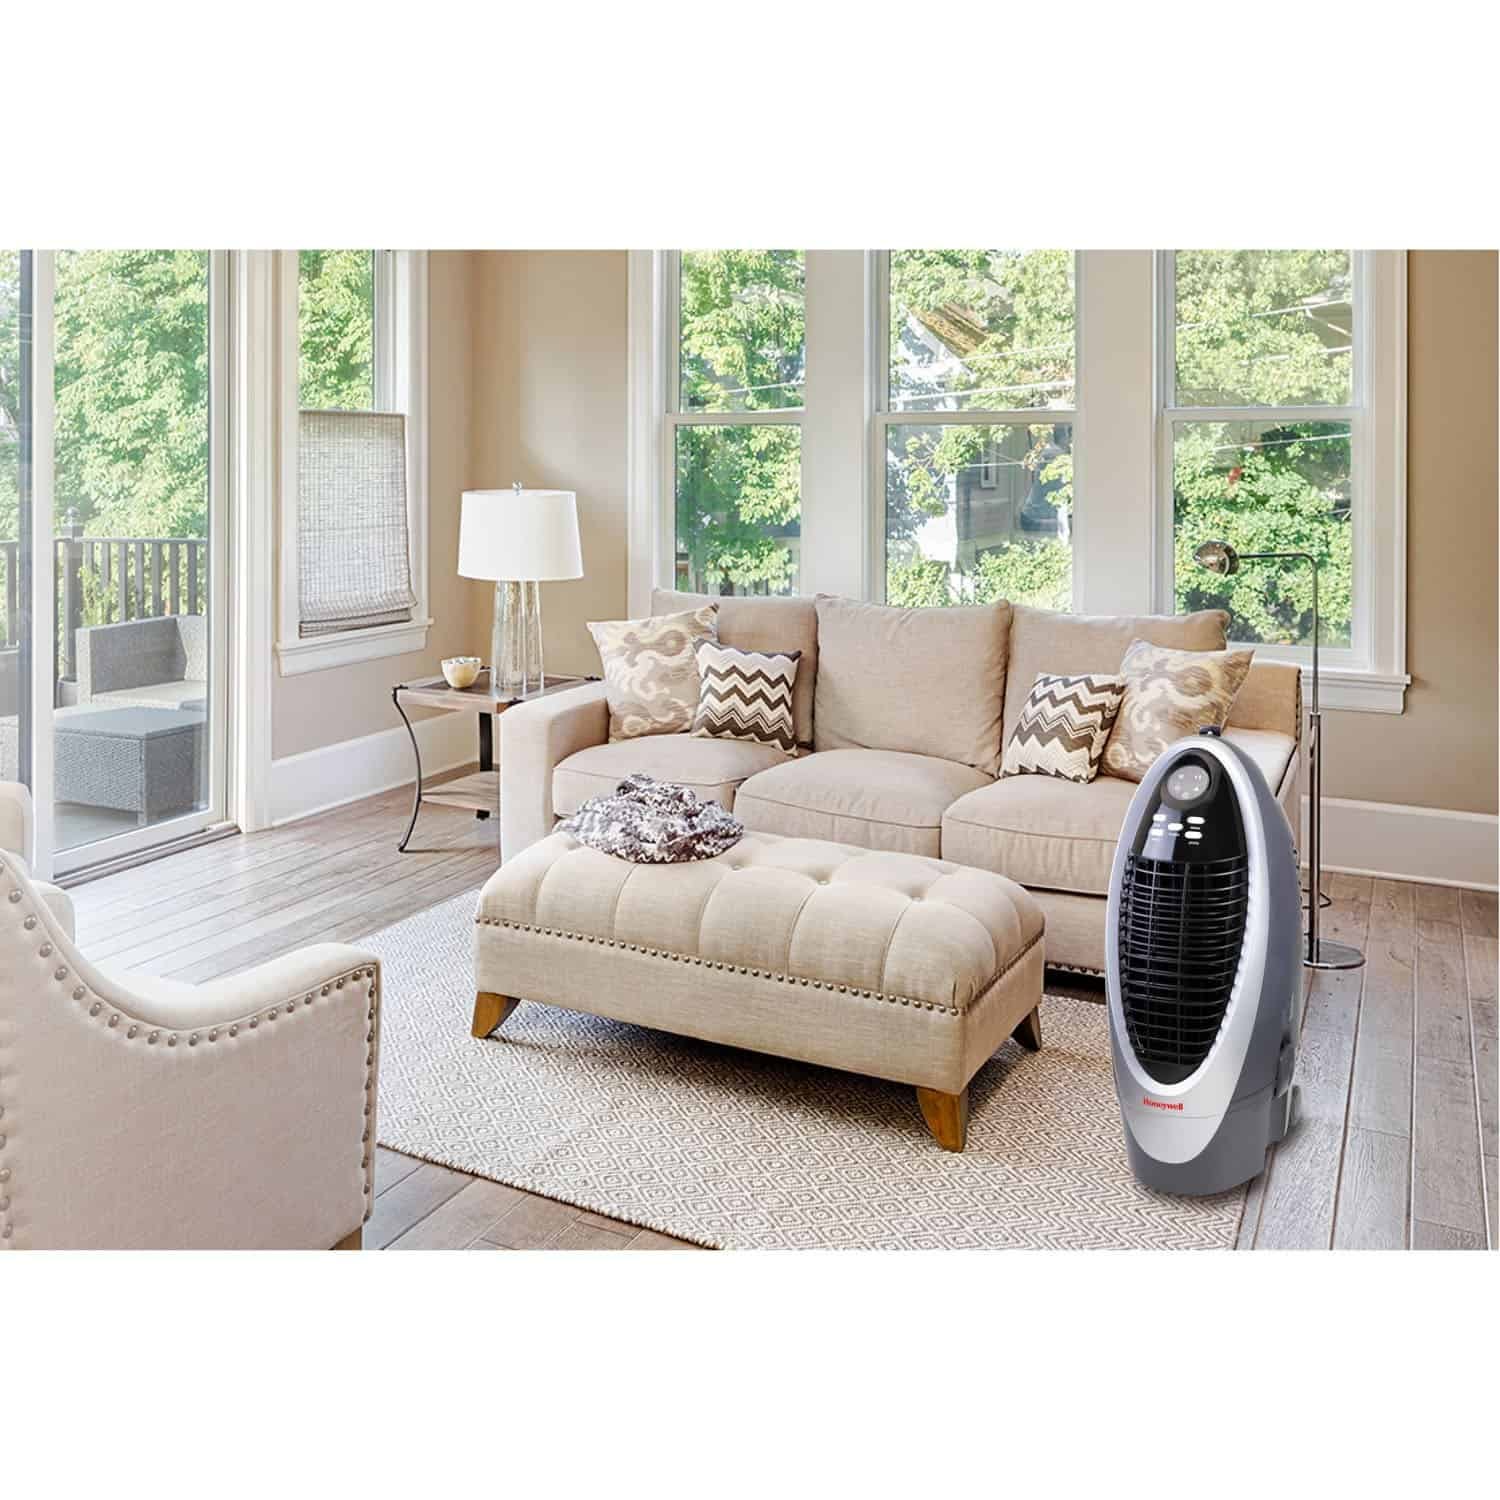 air cooler can cool room